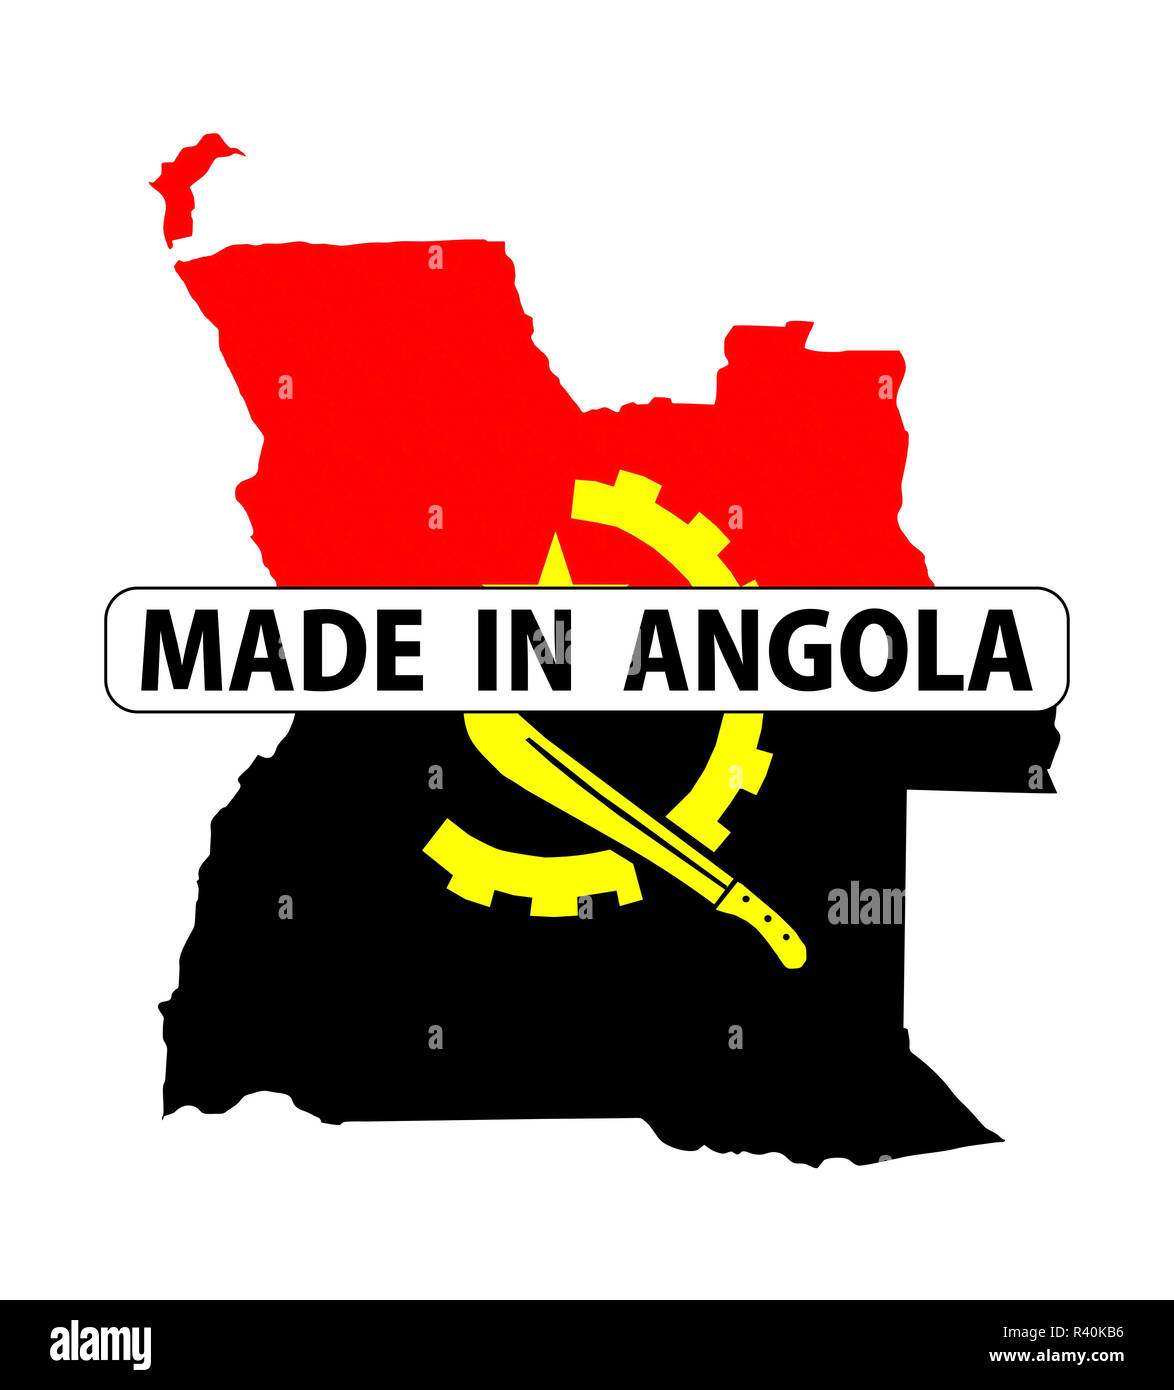 made in angola Stock Photo